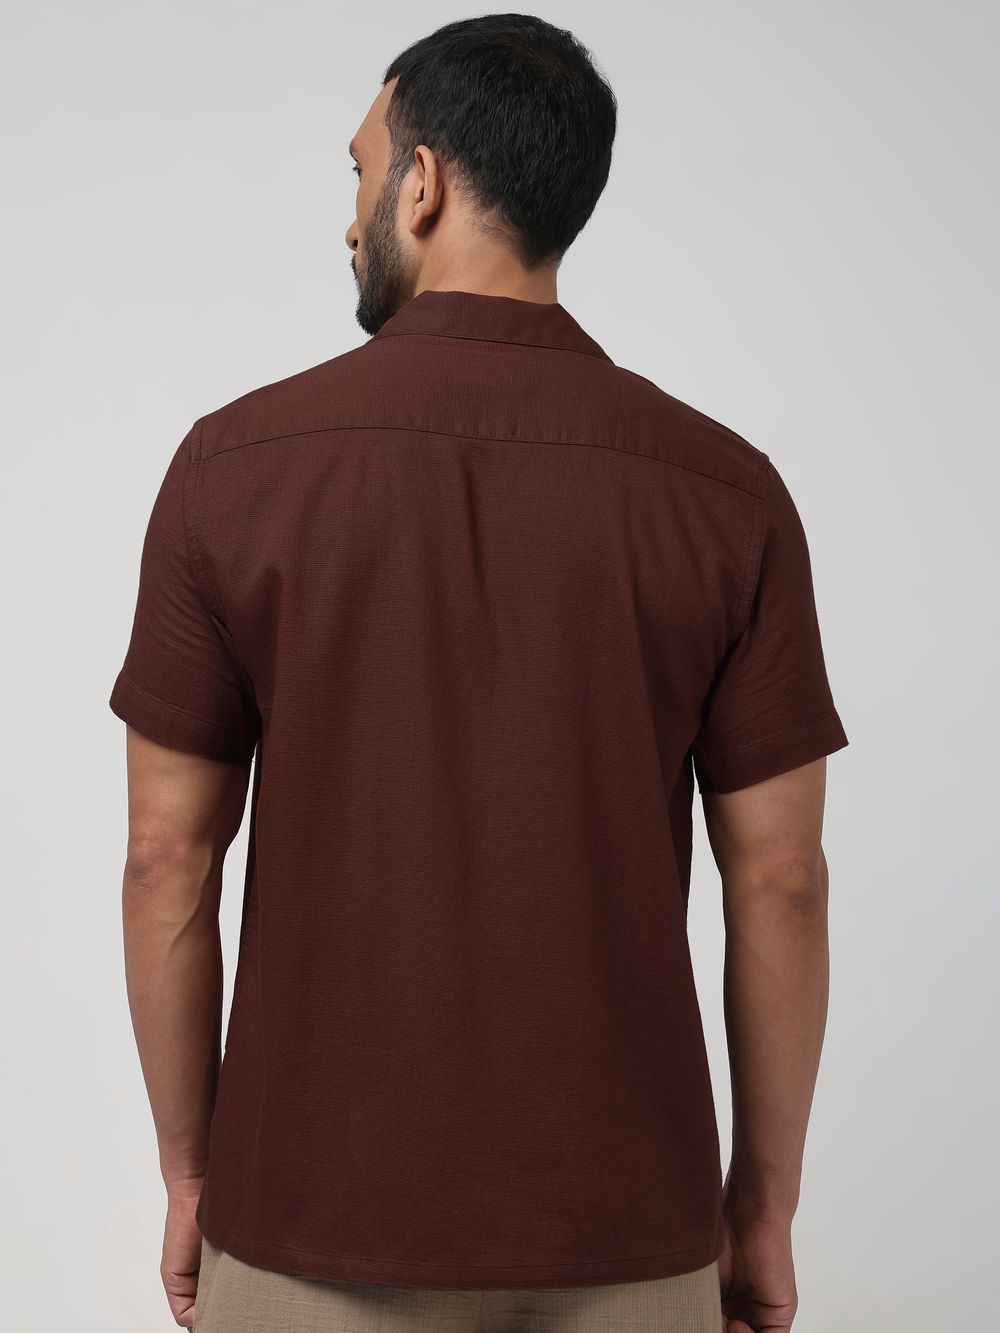 Rust Textured Plain Relaxed Fit Casual Shirt